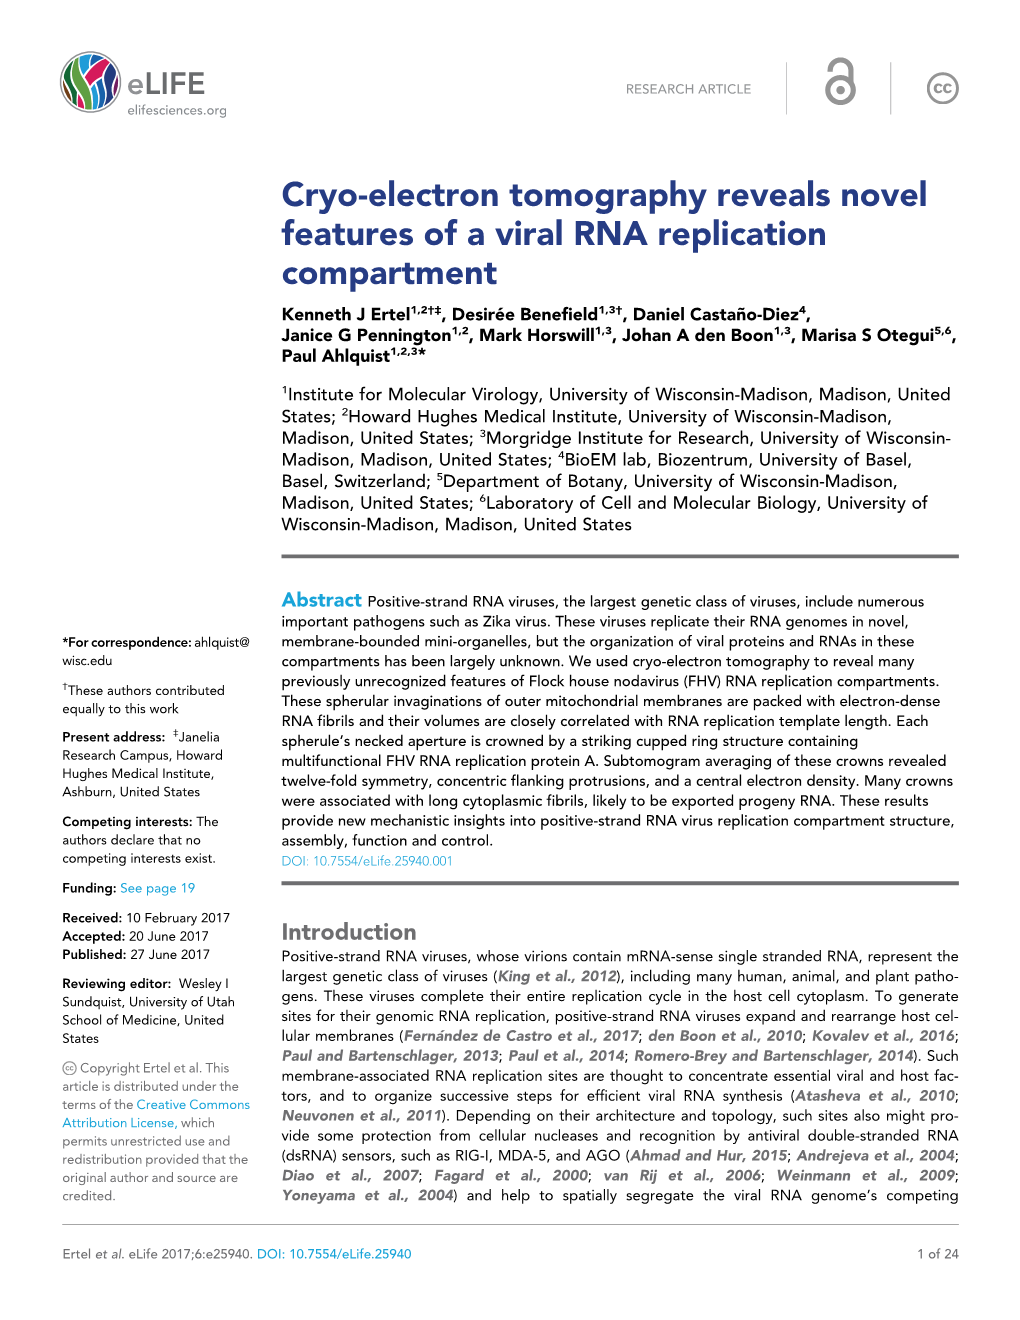 Cryo-Electron Tomography Reveals Novel Features of a Viral RNA